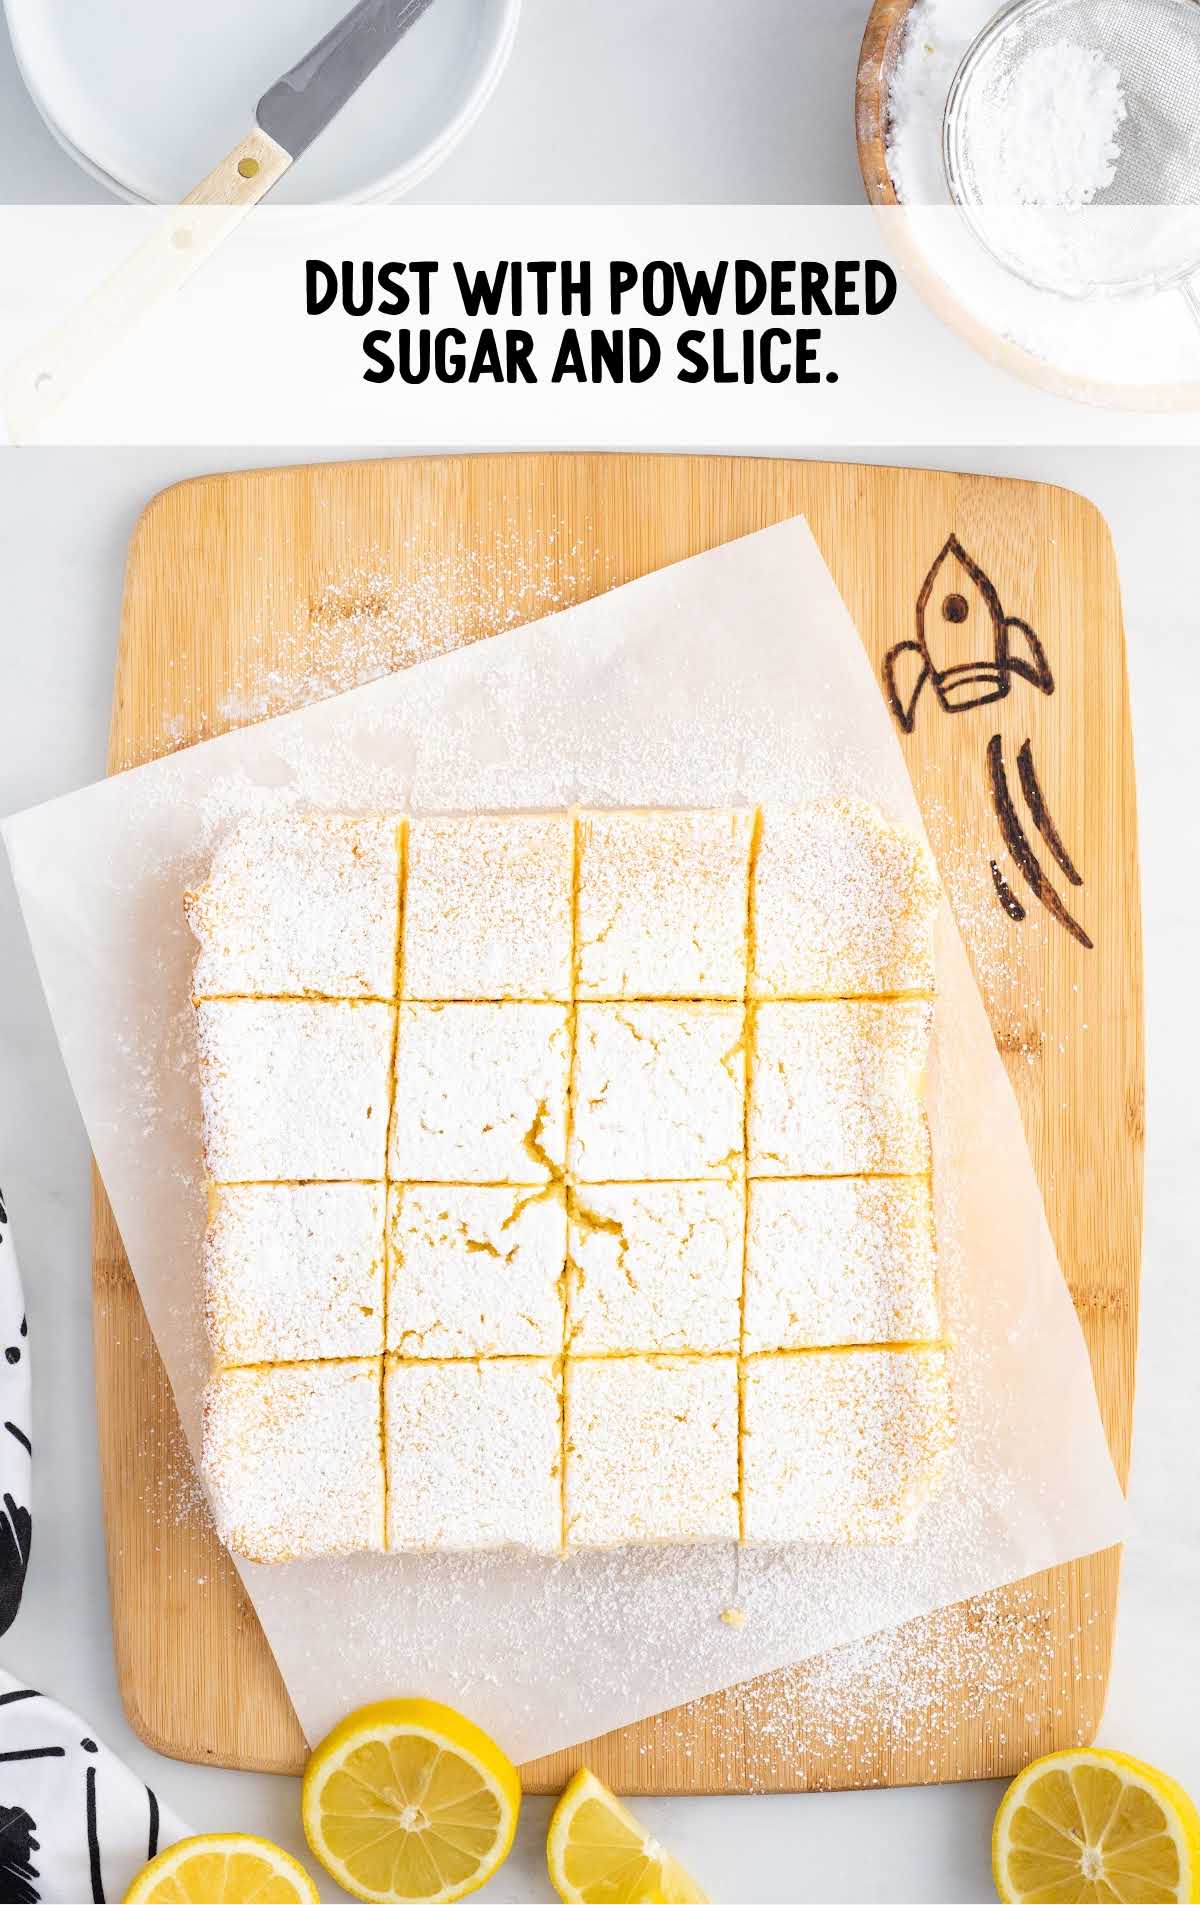 slices of Lemon Custard Cake on a parchment sheet dusted with powdered sugar